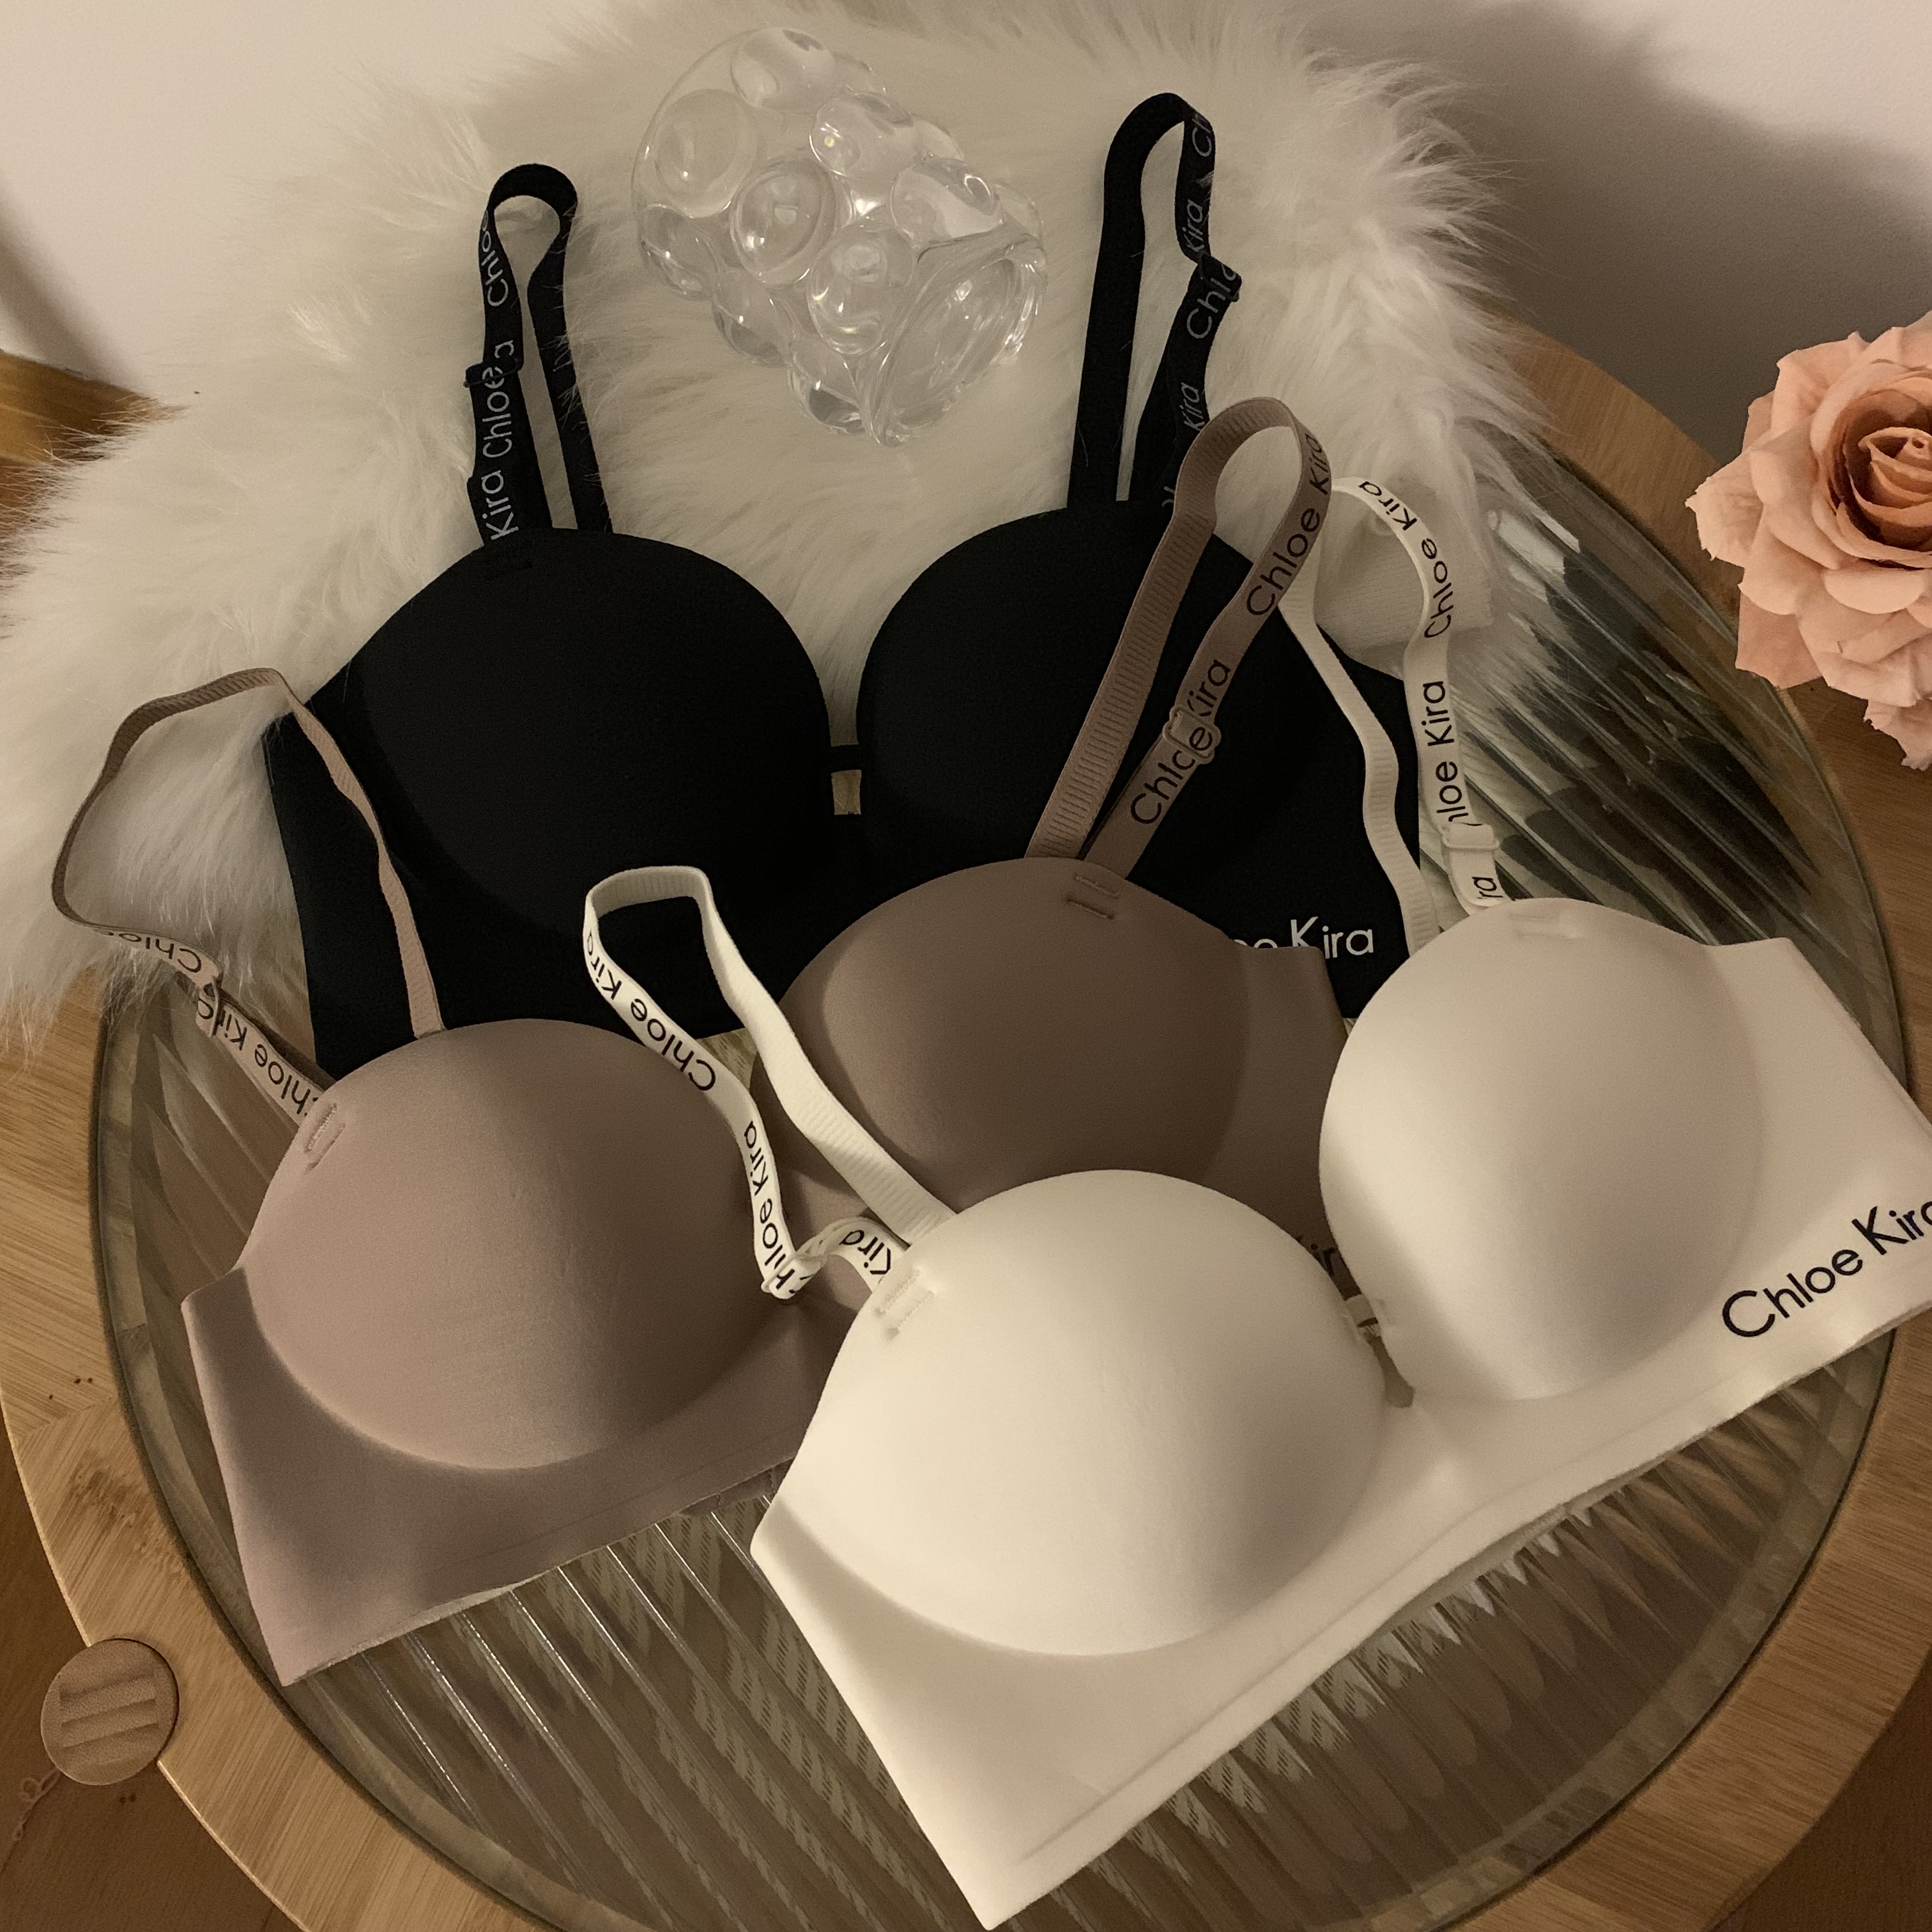 Actual shot of Japanese sexy, simple and versatile push-up bra without rims for girls, breast-retracting underwear